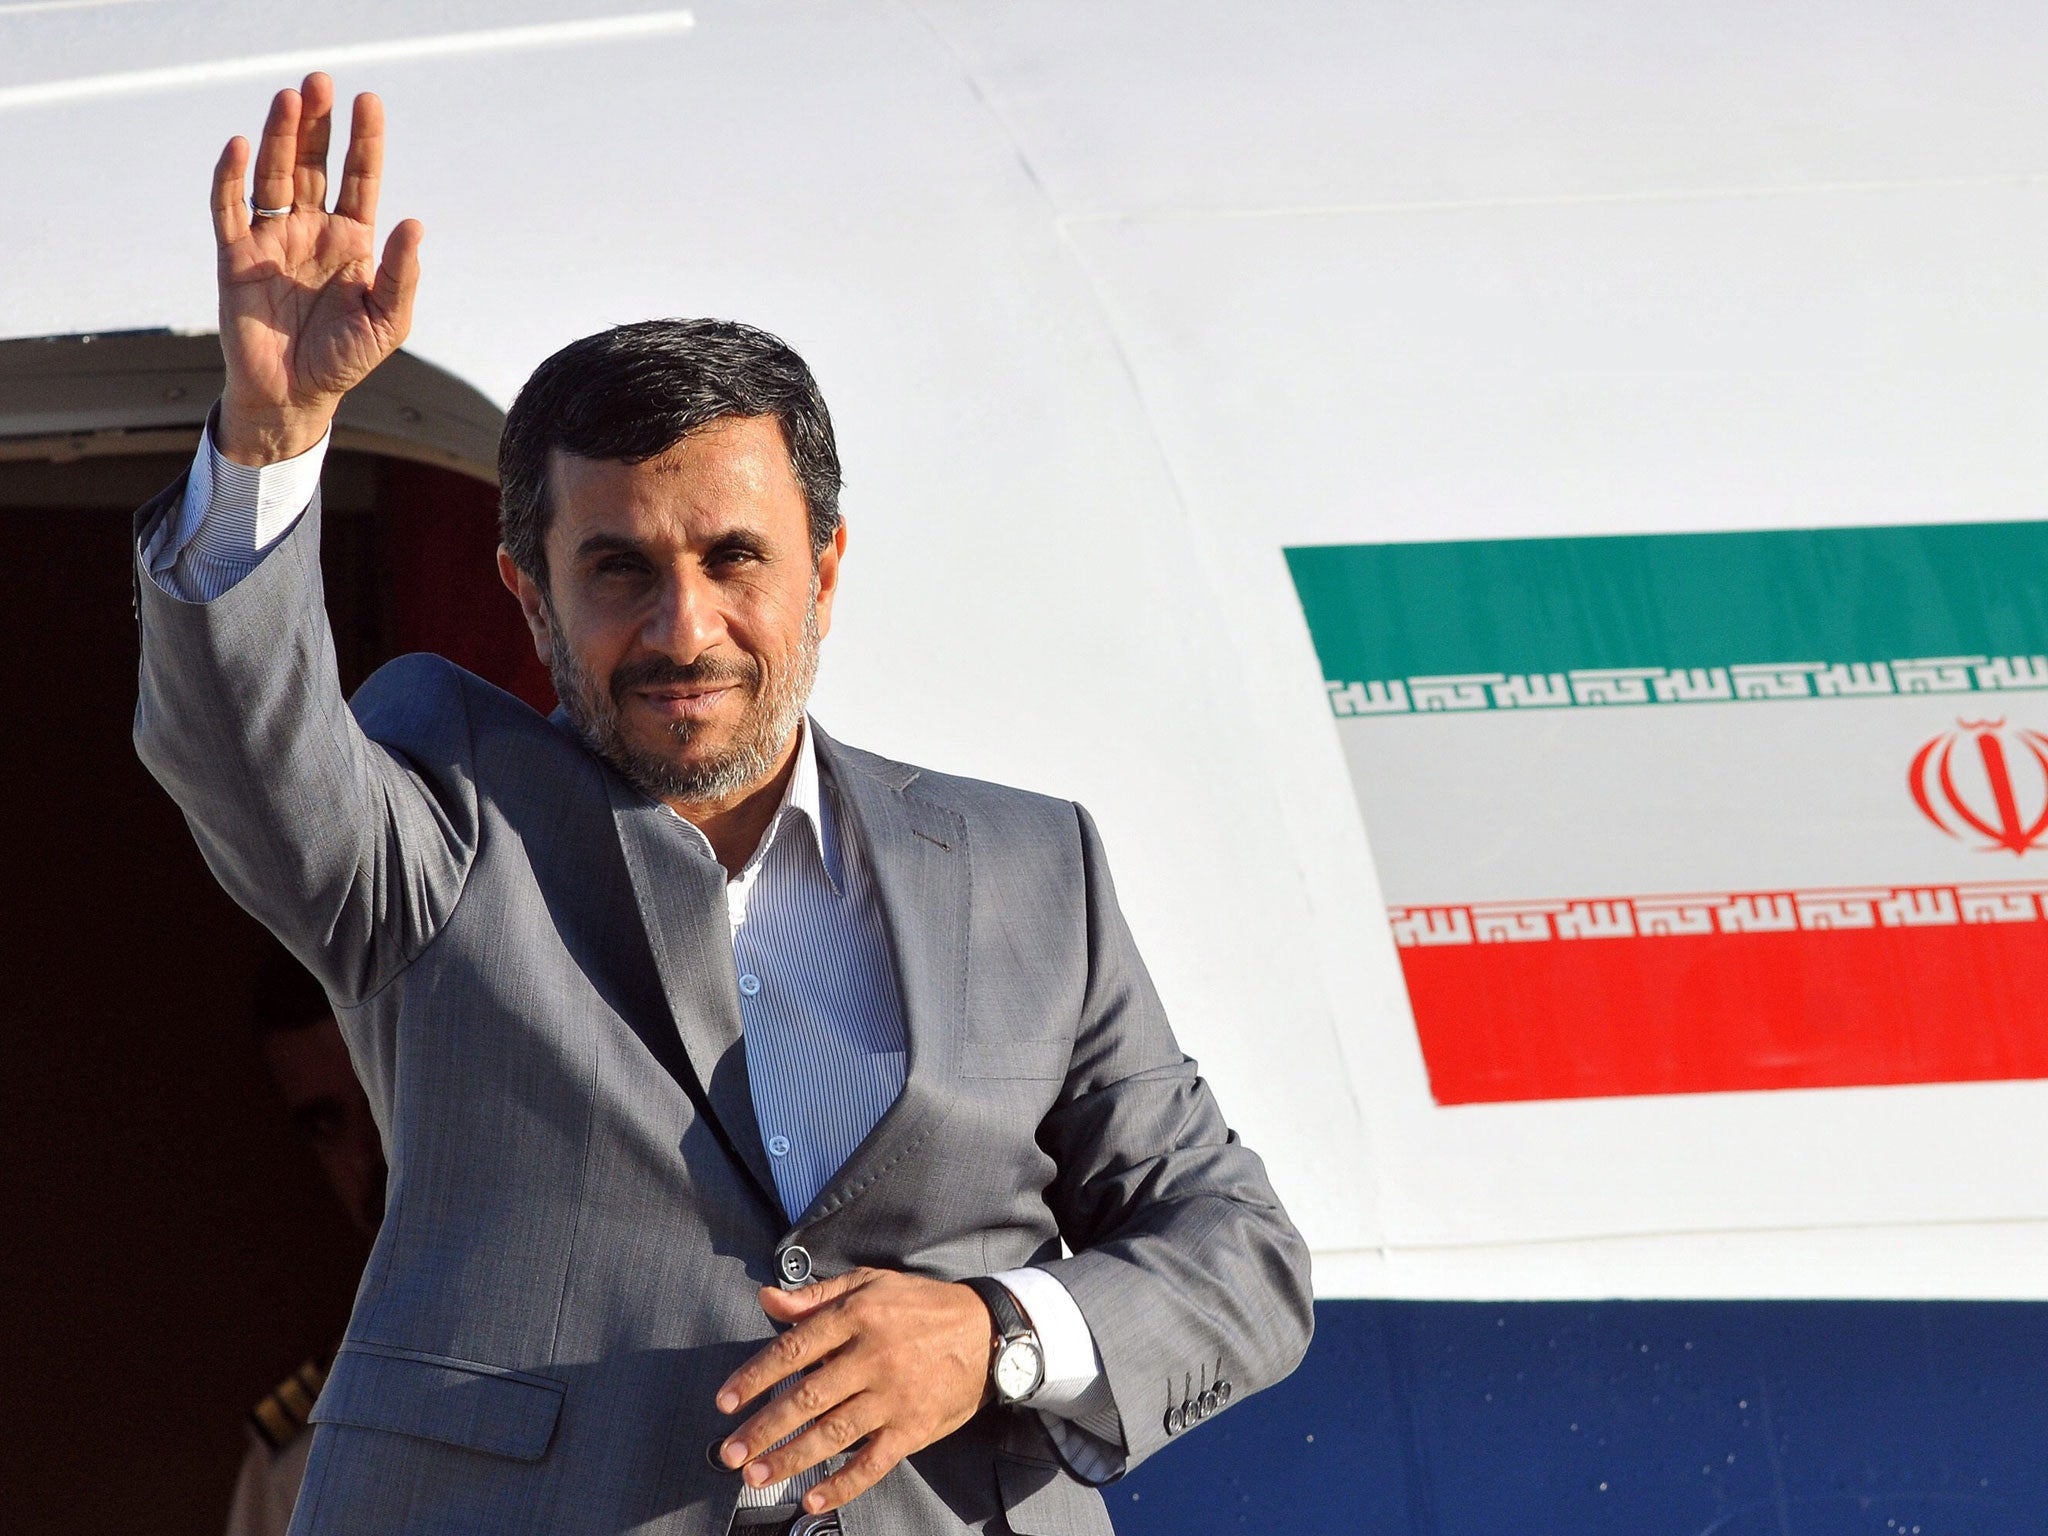 Iranians go to the polls on Friday to elect a new president knowing that for the first time in eight years the country will be led by someone other than Mahmoud Ahmadinejad